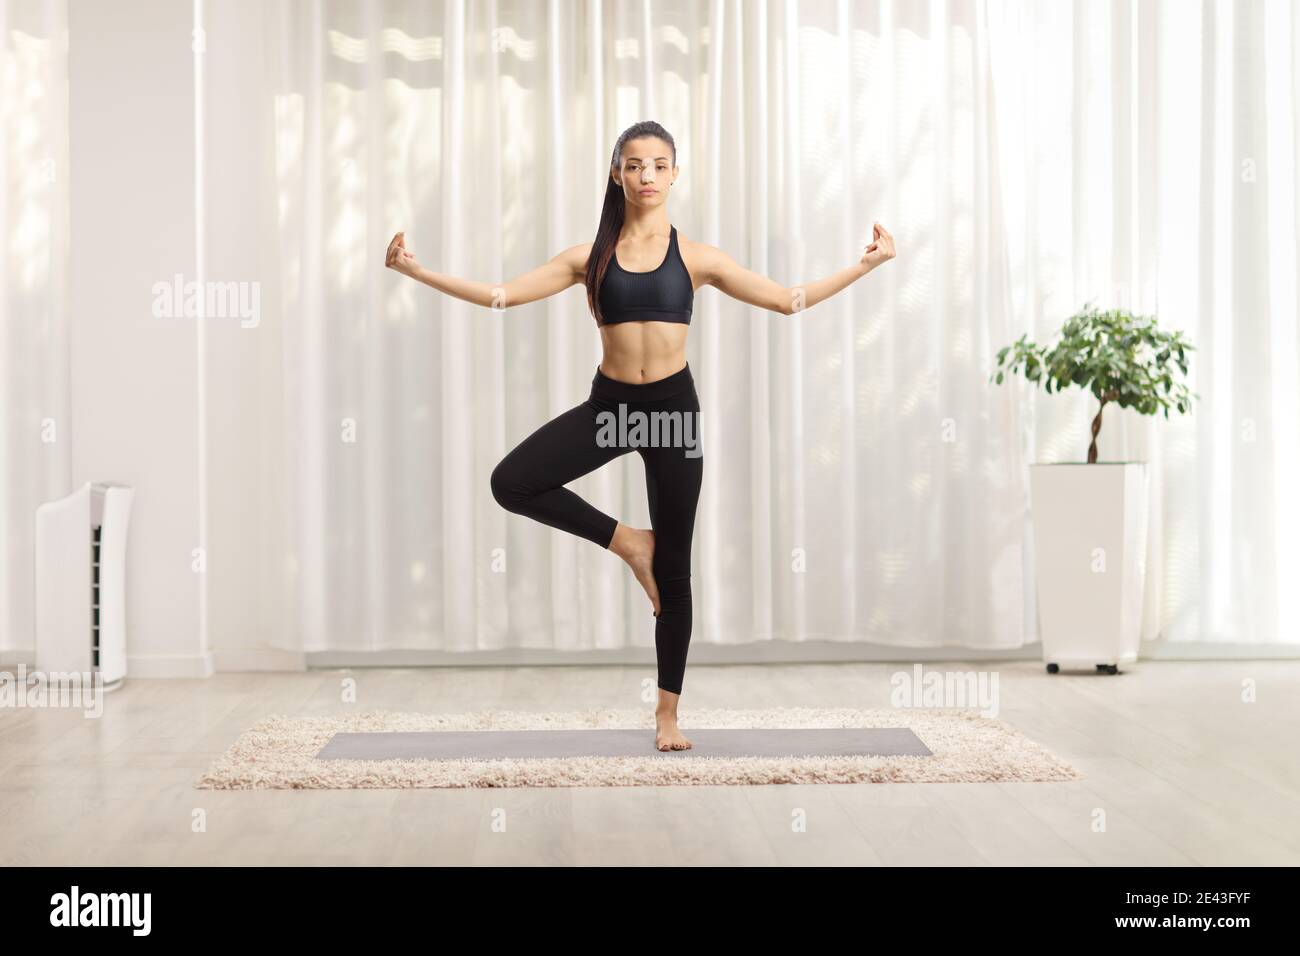 Full length portrait of a young woman practicing yoga at home Stock Photo